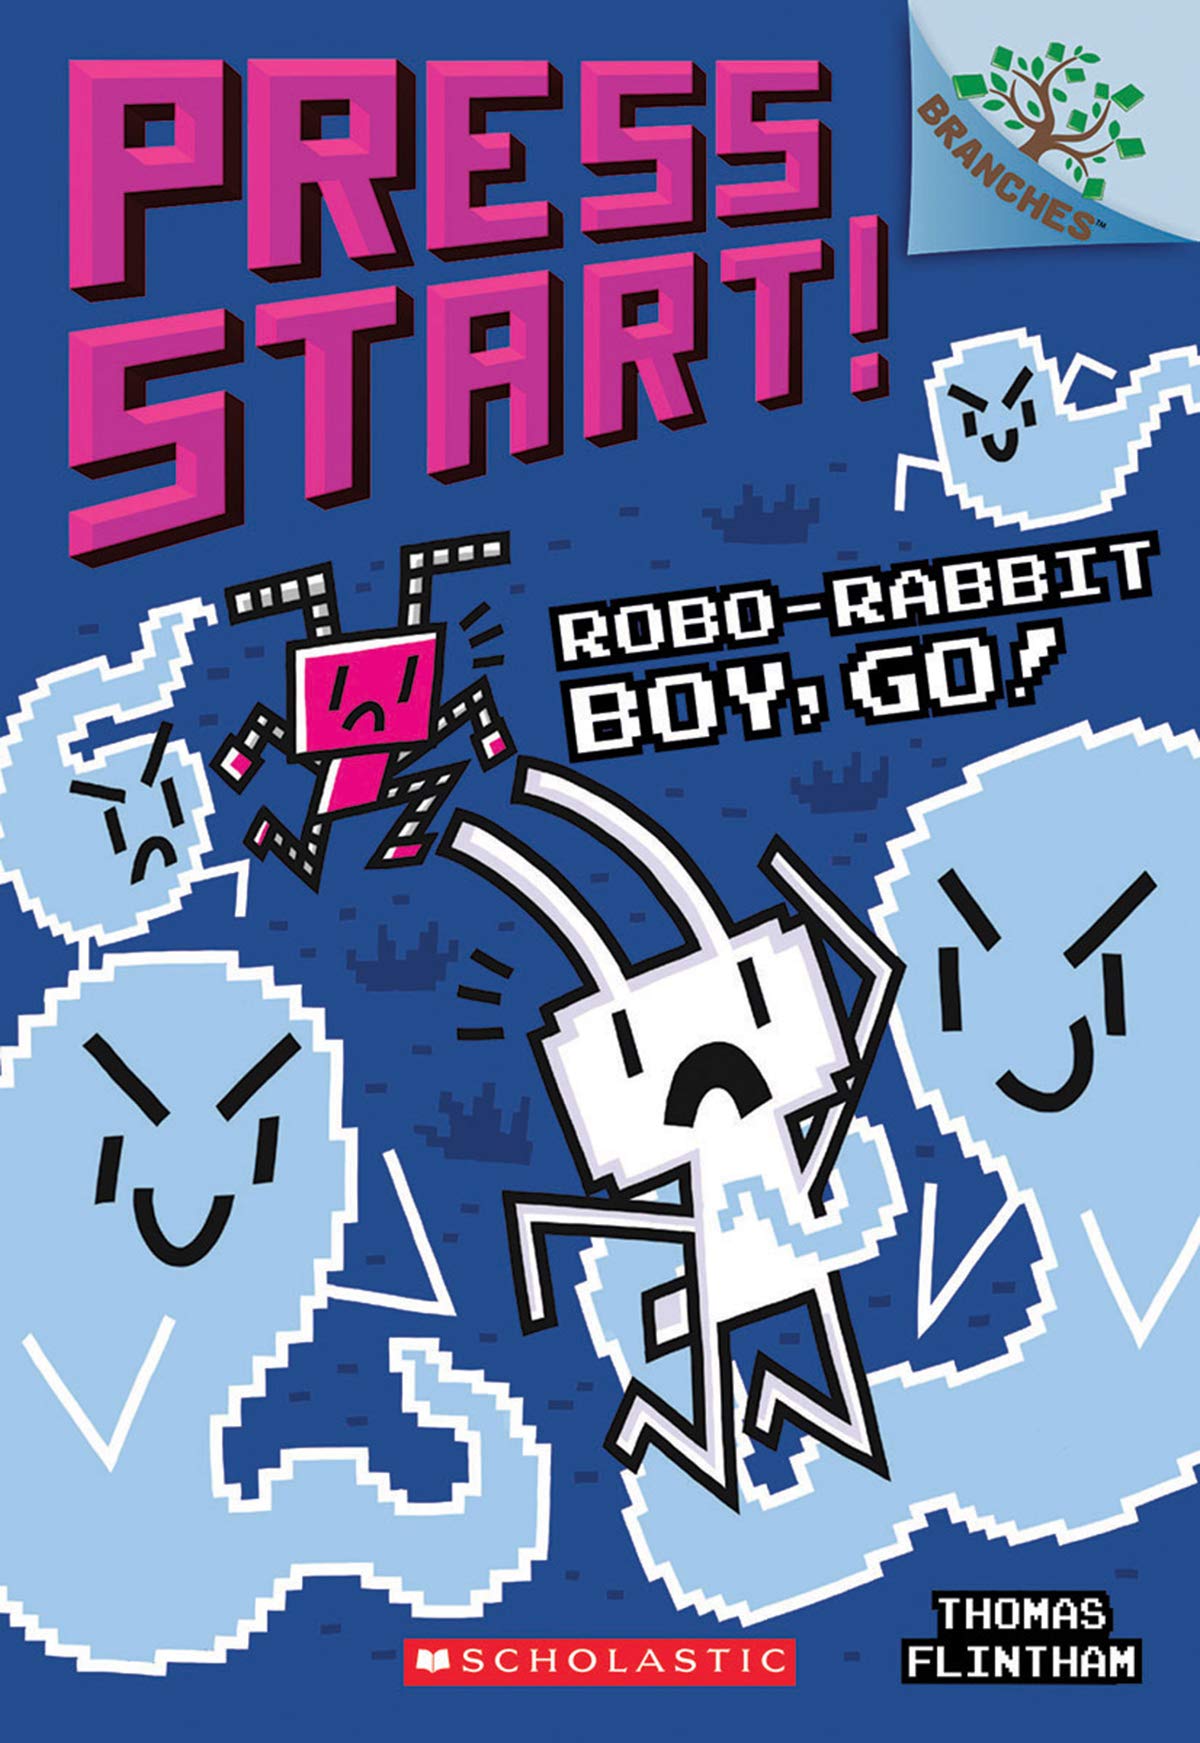 Cover of Robo-Rabbit Boy Go!, by Thomas Flintham, showing video game characters: a white rabbit being held by one of four ghosts, with a pink robotic rabbit jumping in. The series title, Press Start!, is across the top in a large, pixelated font.